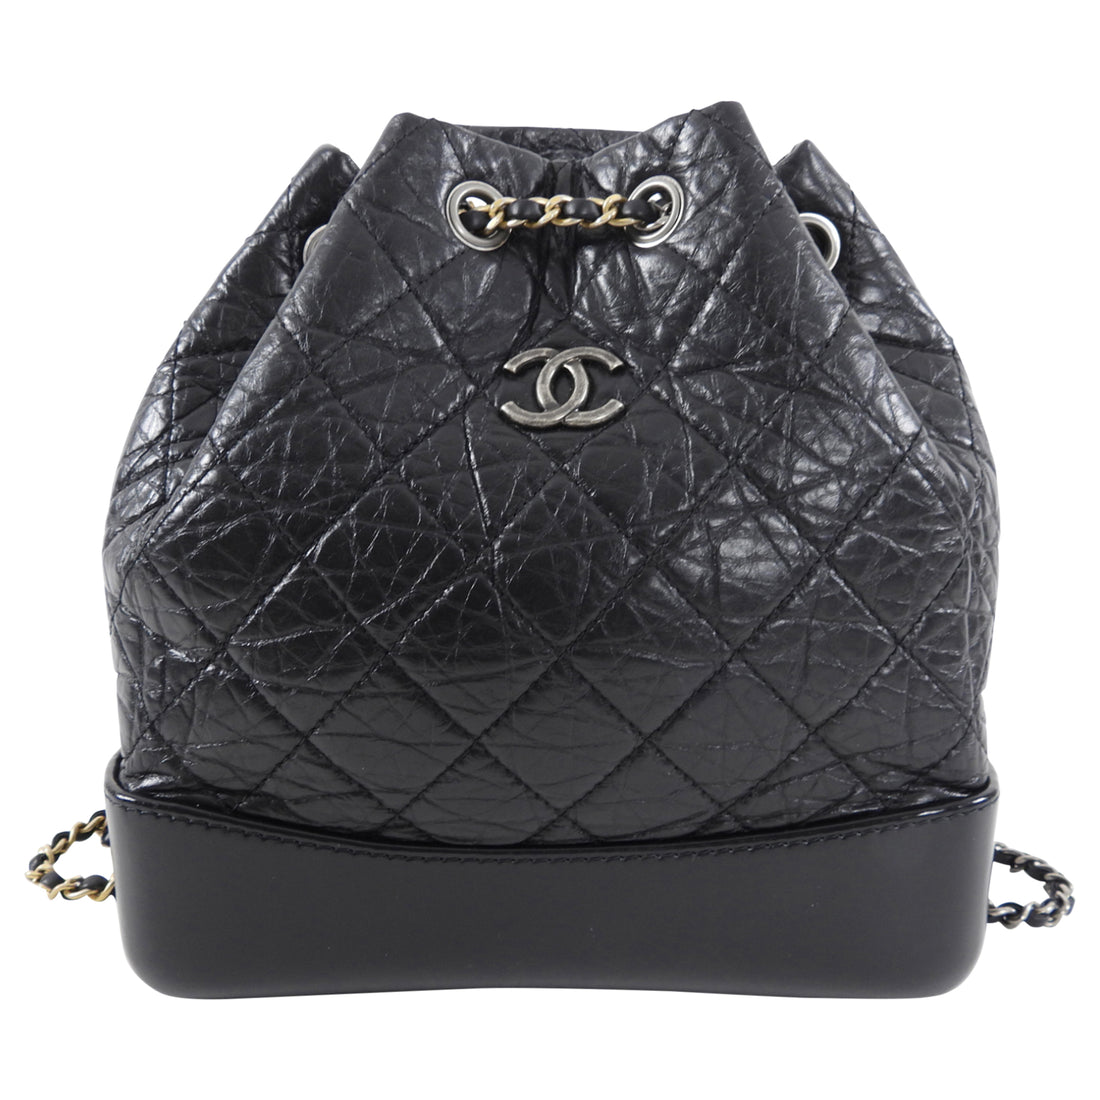 Buy Pre-Owned CHANEL Gabrielle Small Backpack Black Leather